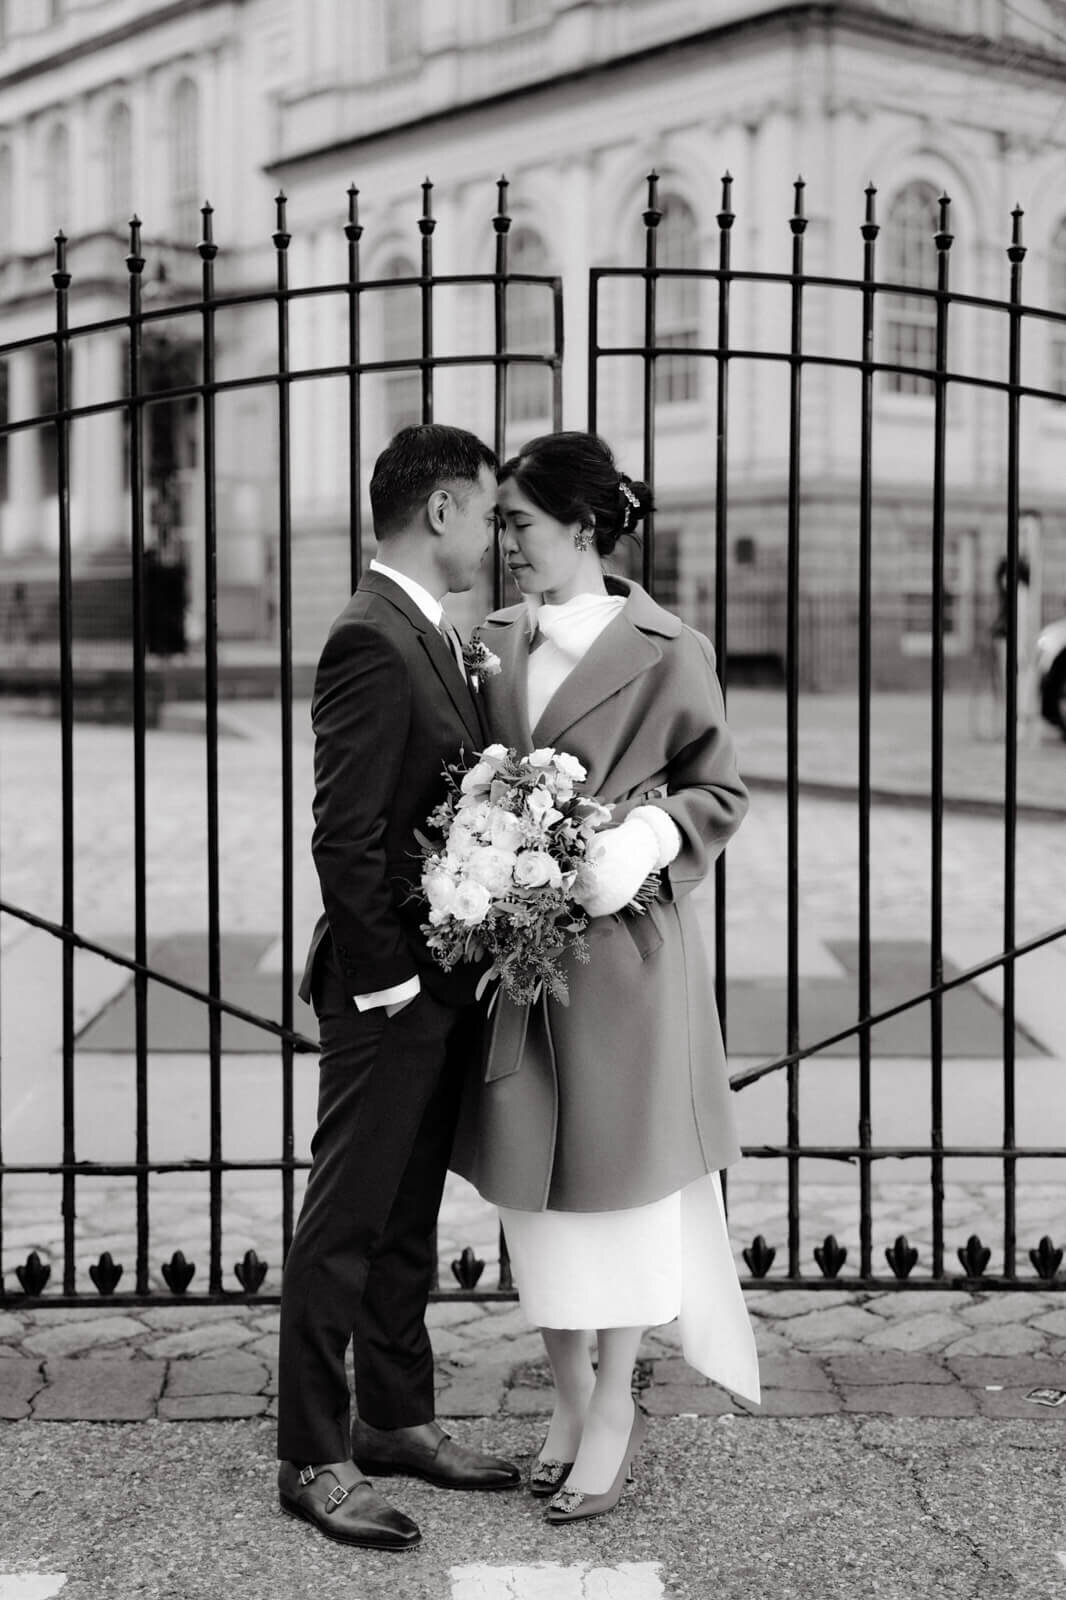 Black and white photo of the bride with flower bouquet, and the groom, standing in front of the gate of an old building.